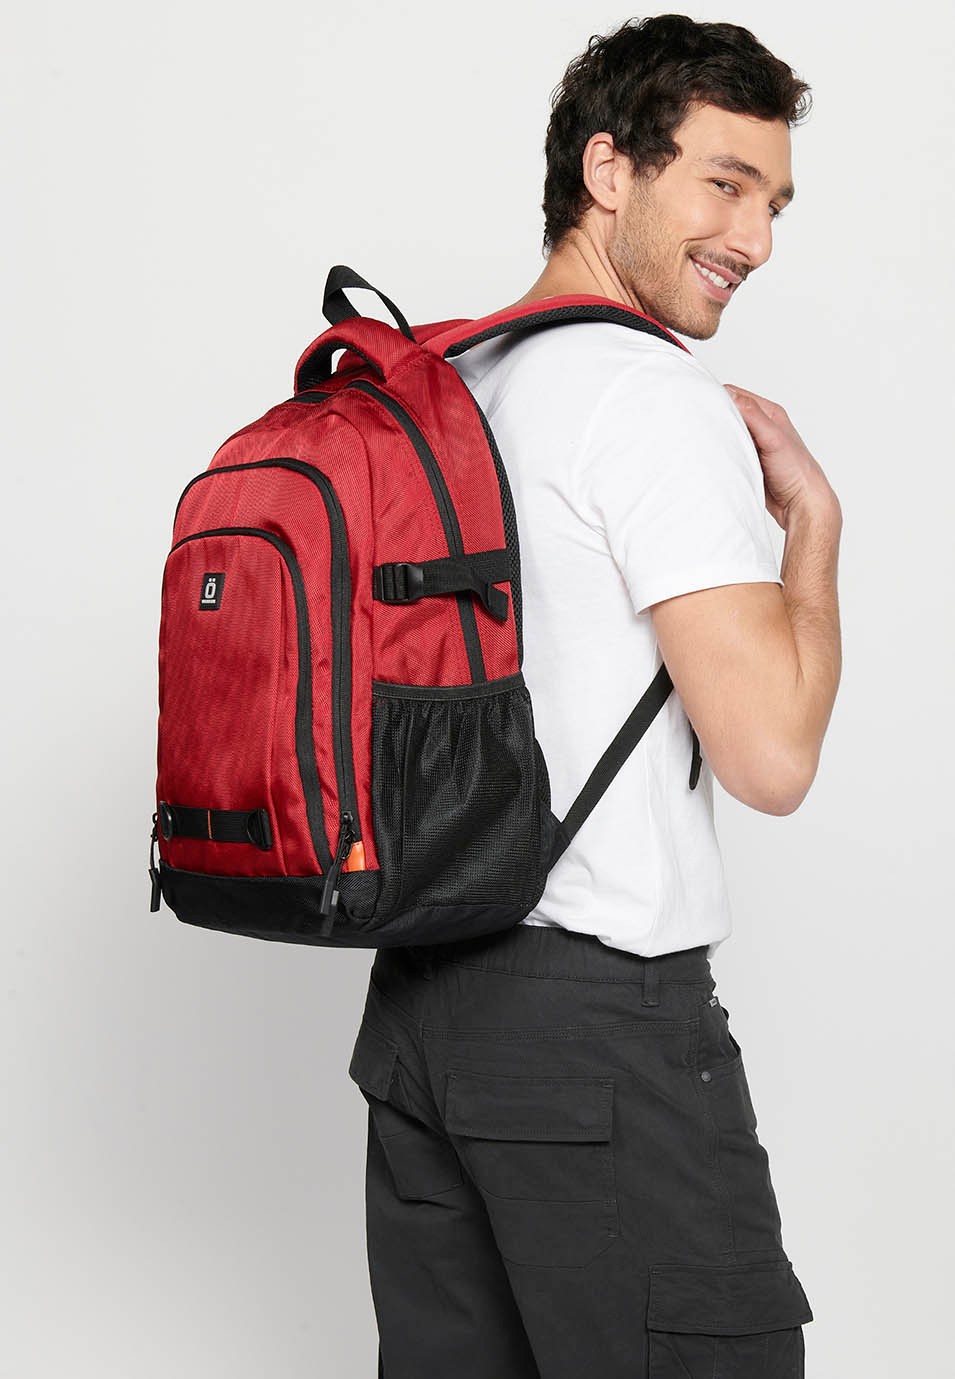 Koröshi backpack with three zippered compartments, one for laptop, with red interior pockets 9